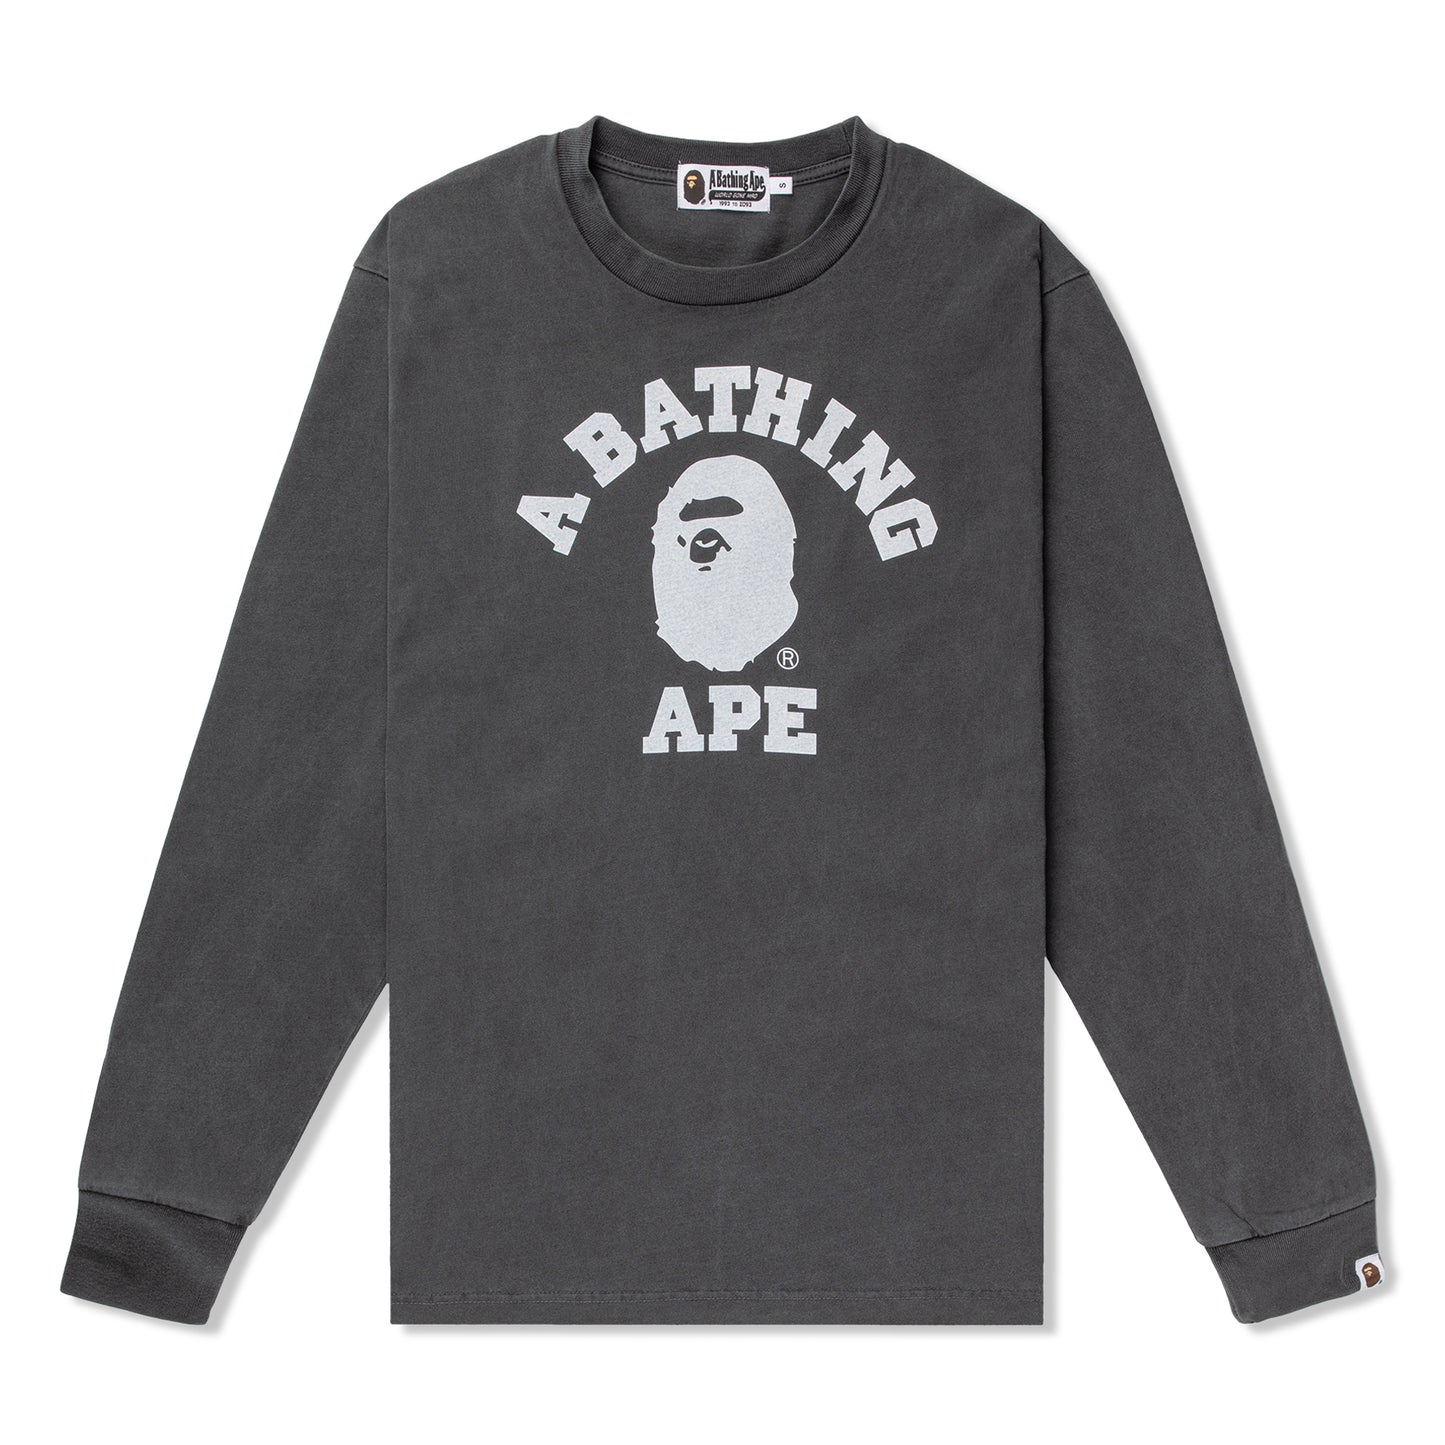 A Bathing Ape Overdye College Relaxed Fit Long Sleeve Tee (Black)